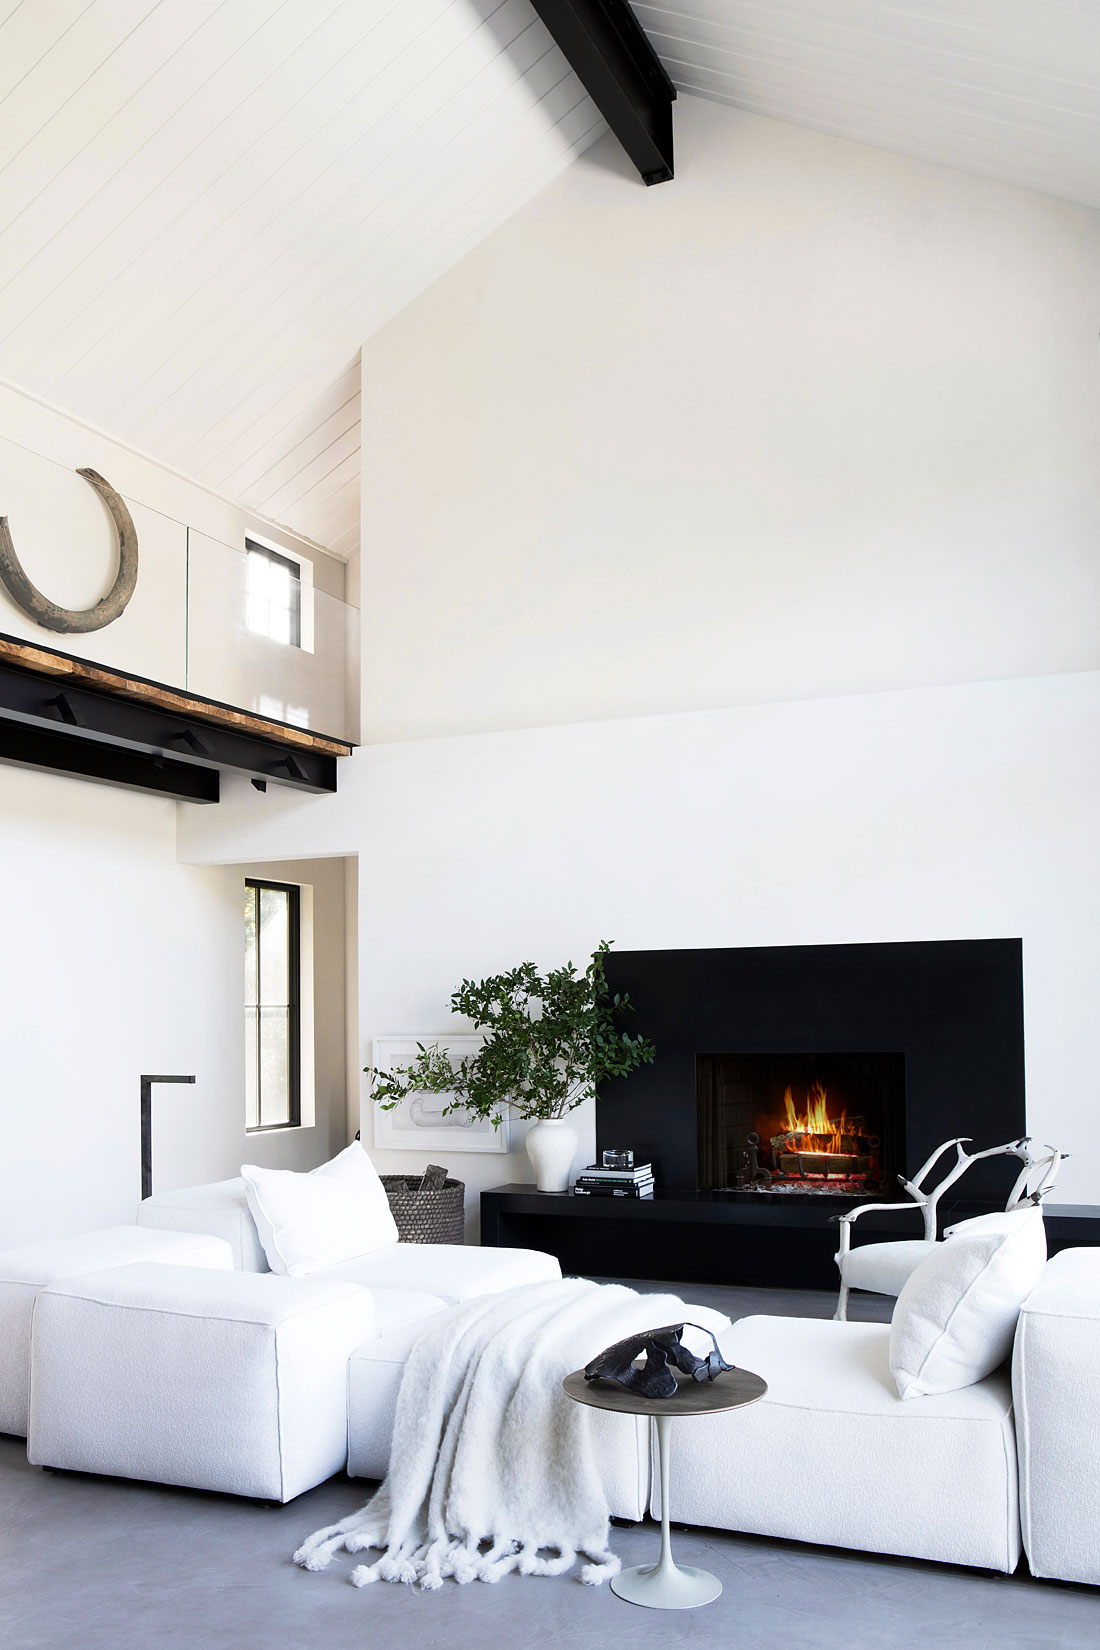 Hamptons Modernist Barn - DPAGES - a design publication for lovers of ...